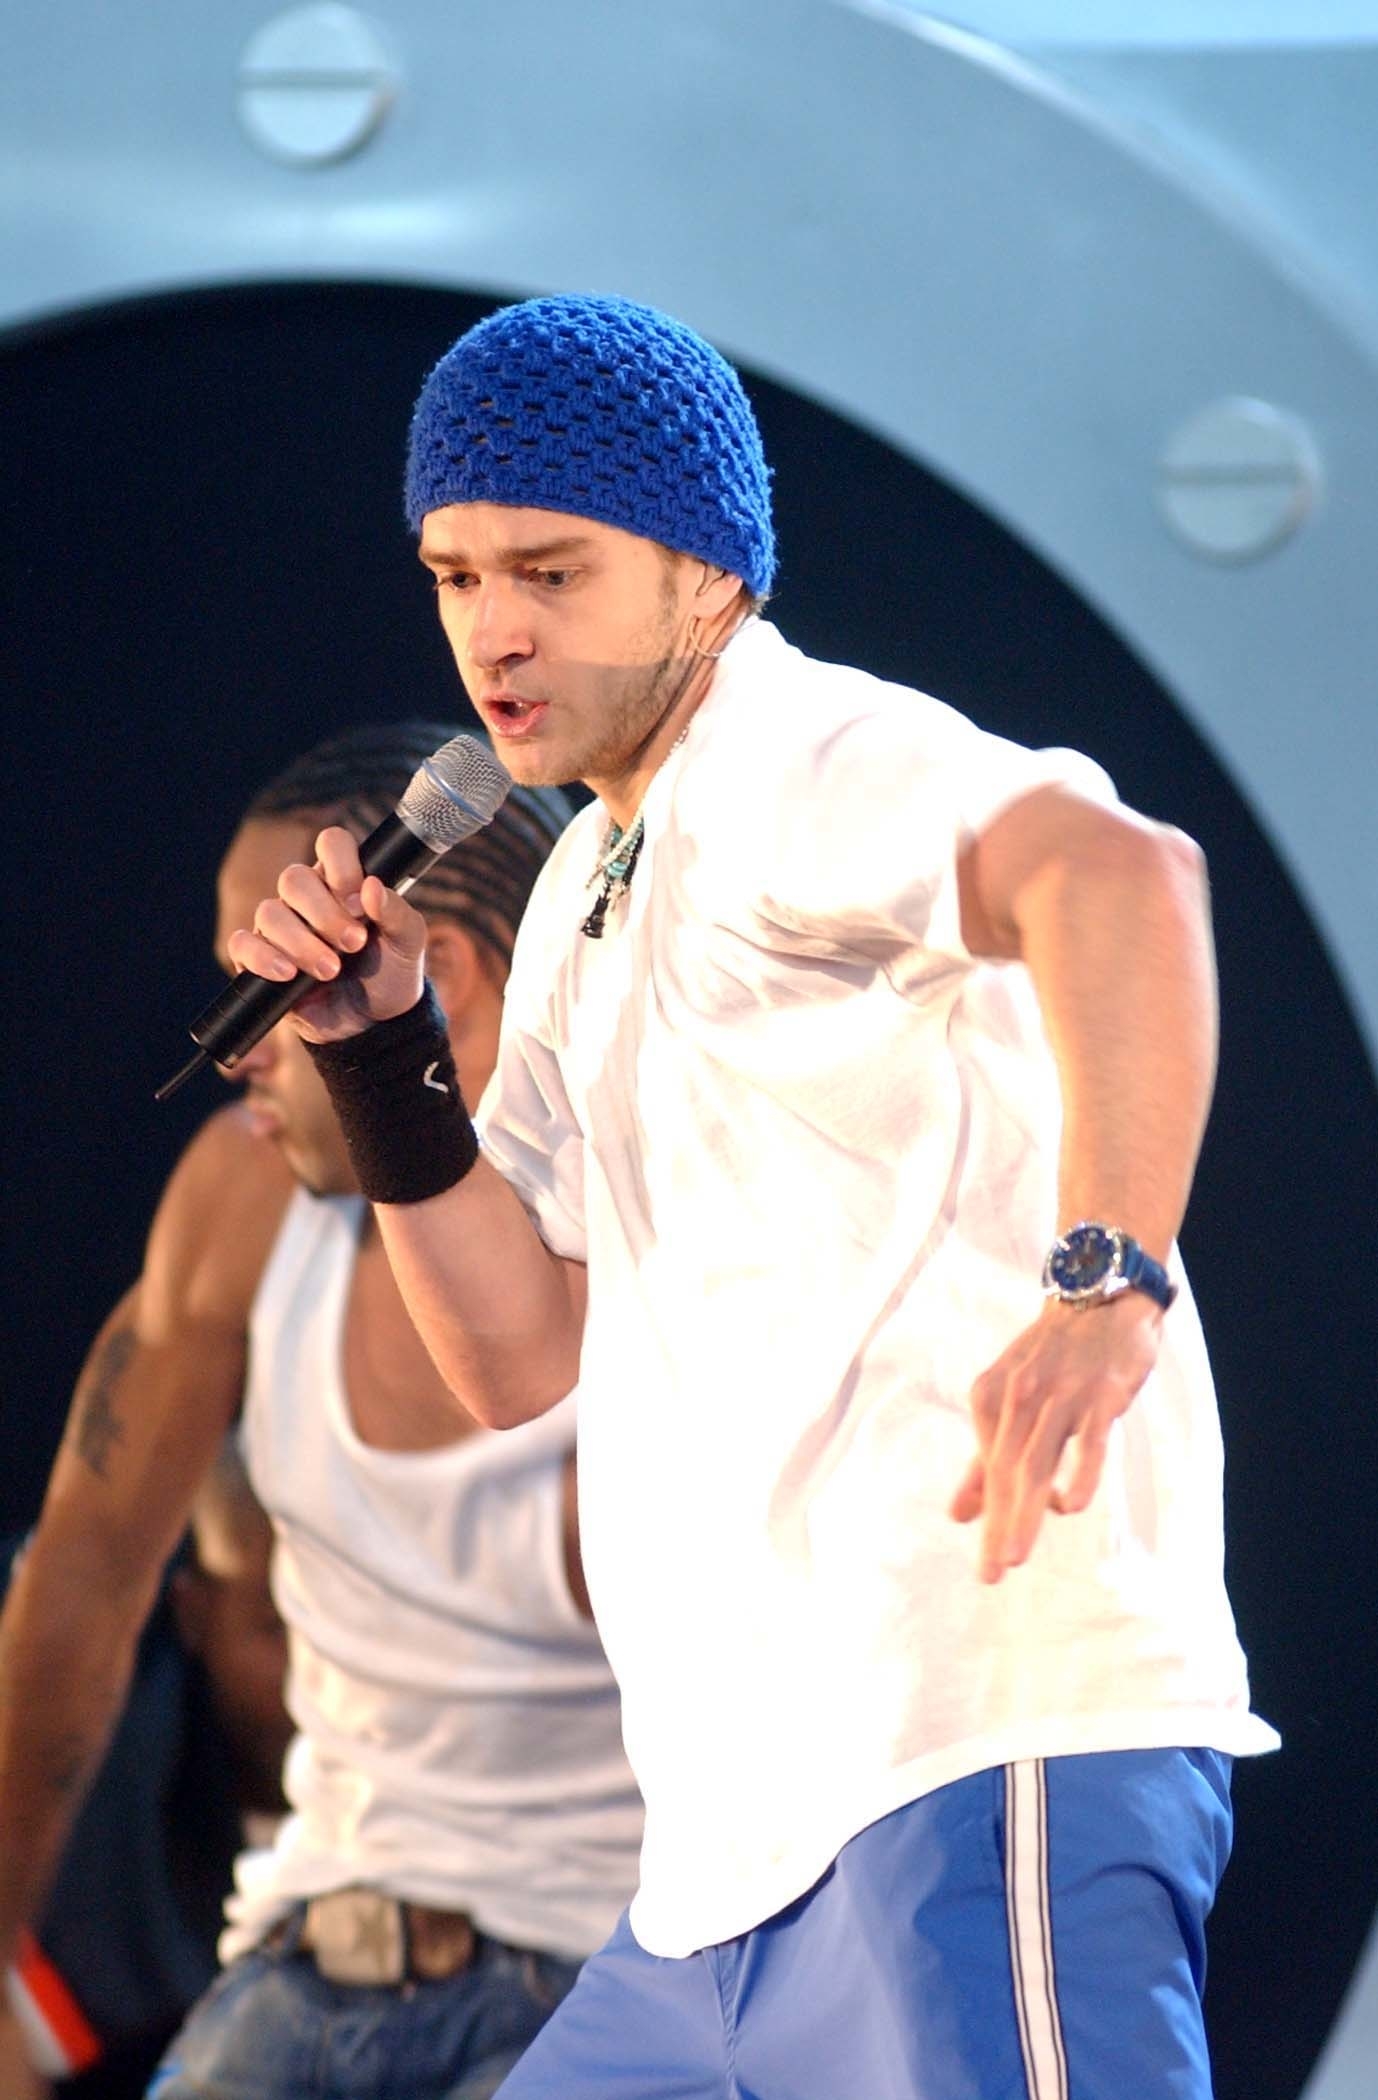 Justin wearing a knit beanie and performing onstage